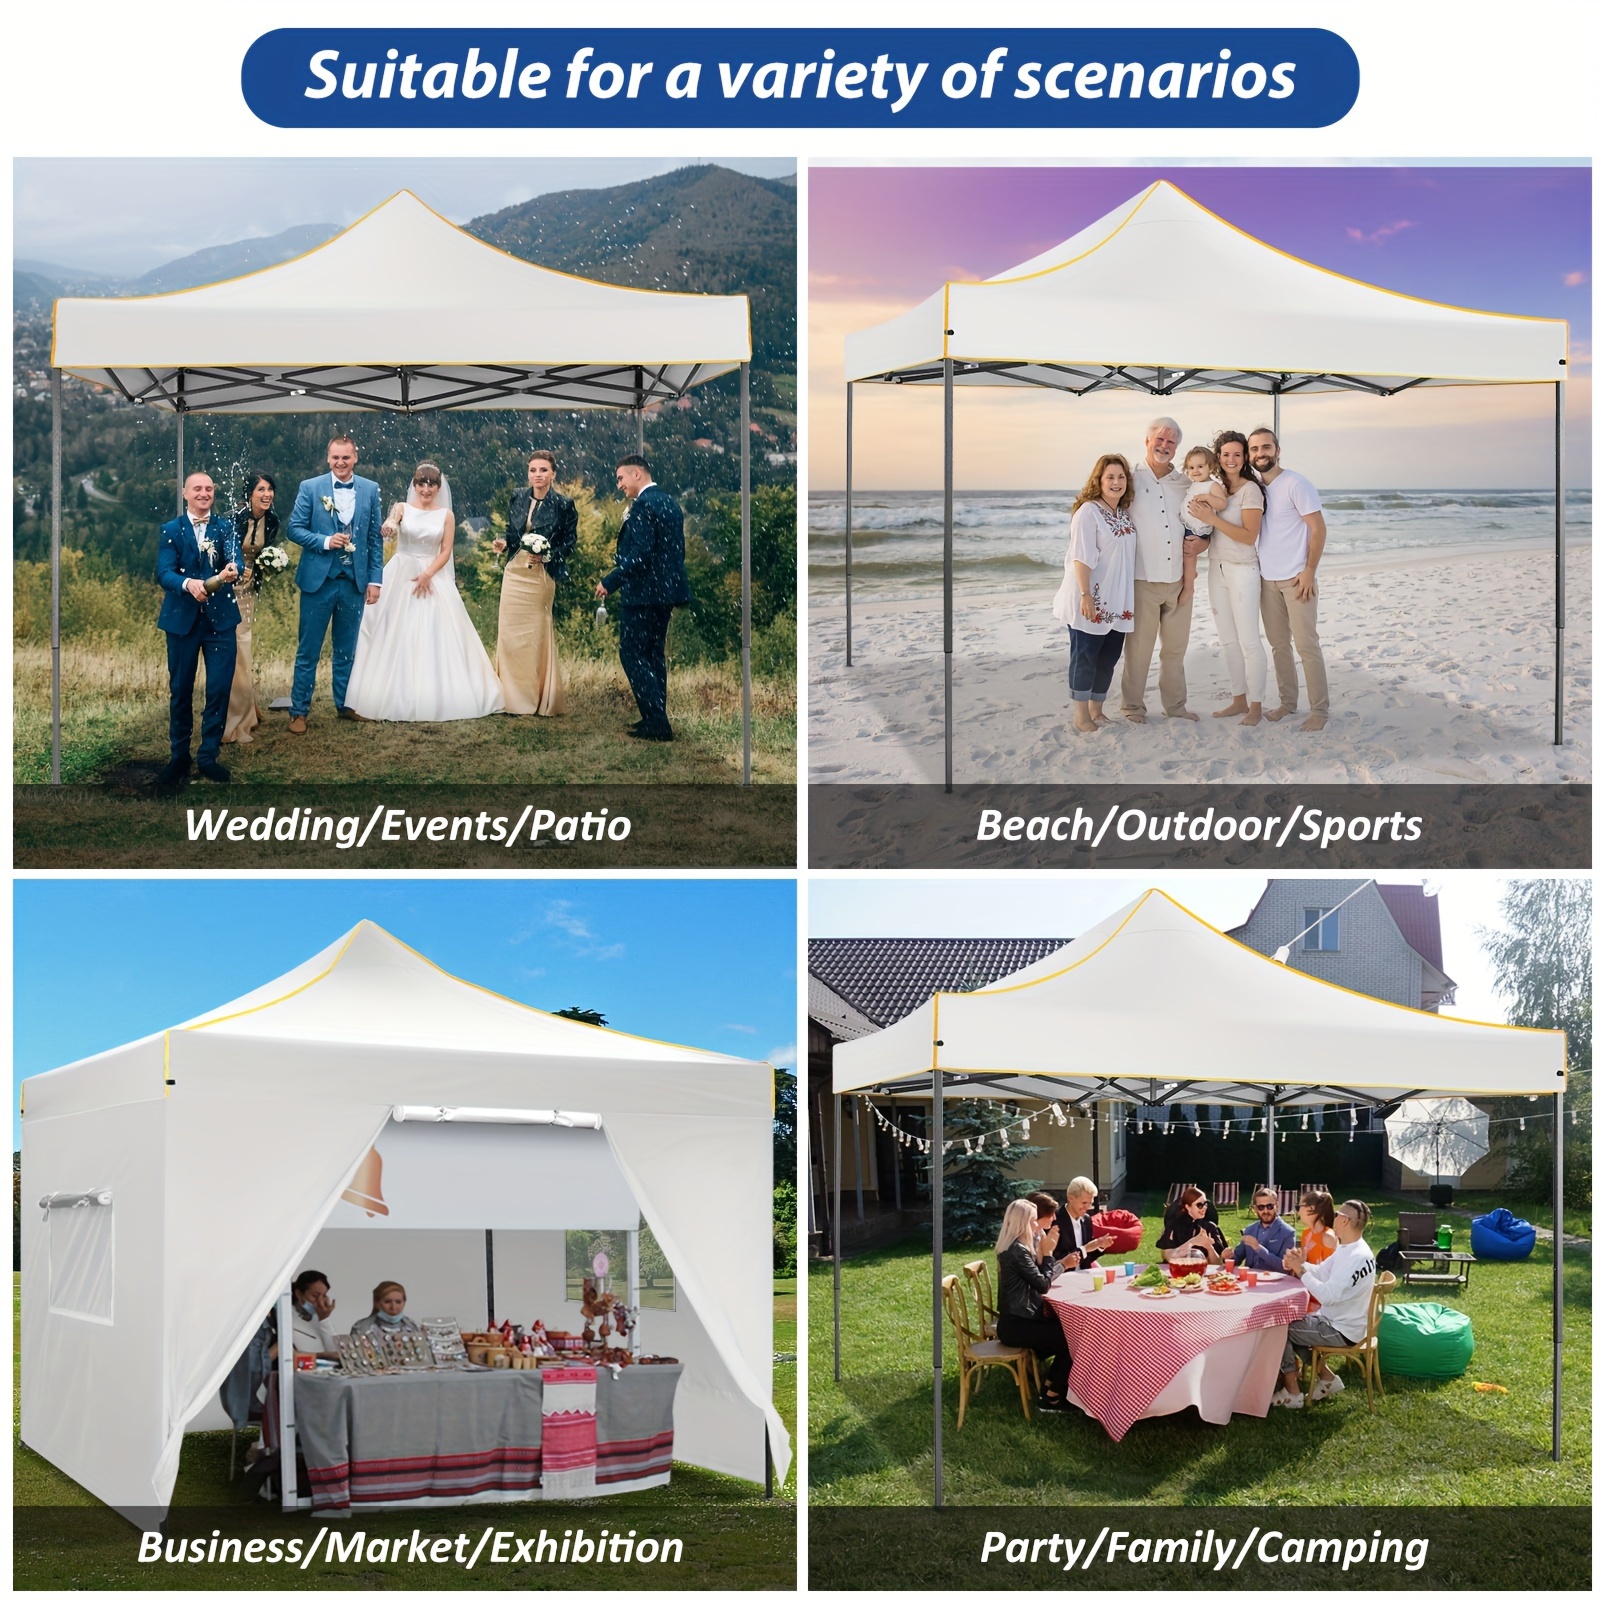 

Tooluck Canopy Tent 10x10, Outdoor Pop Up Canopy Tent With Sidewalls, Heavy Duty Canopy Waterproof Vendor Tent For Backyard, Parties, Camping, Commercial